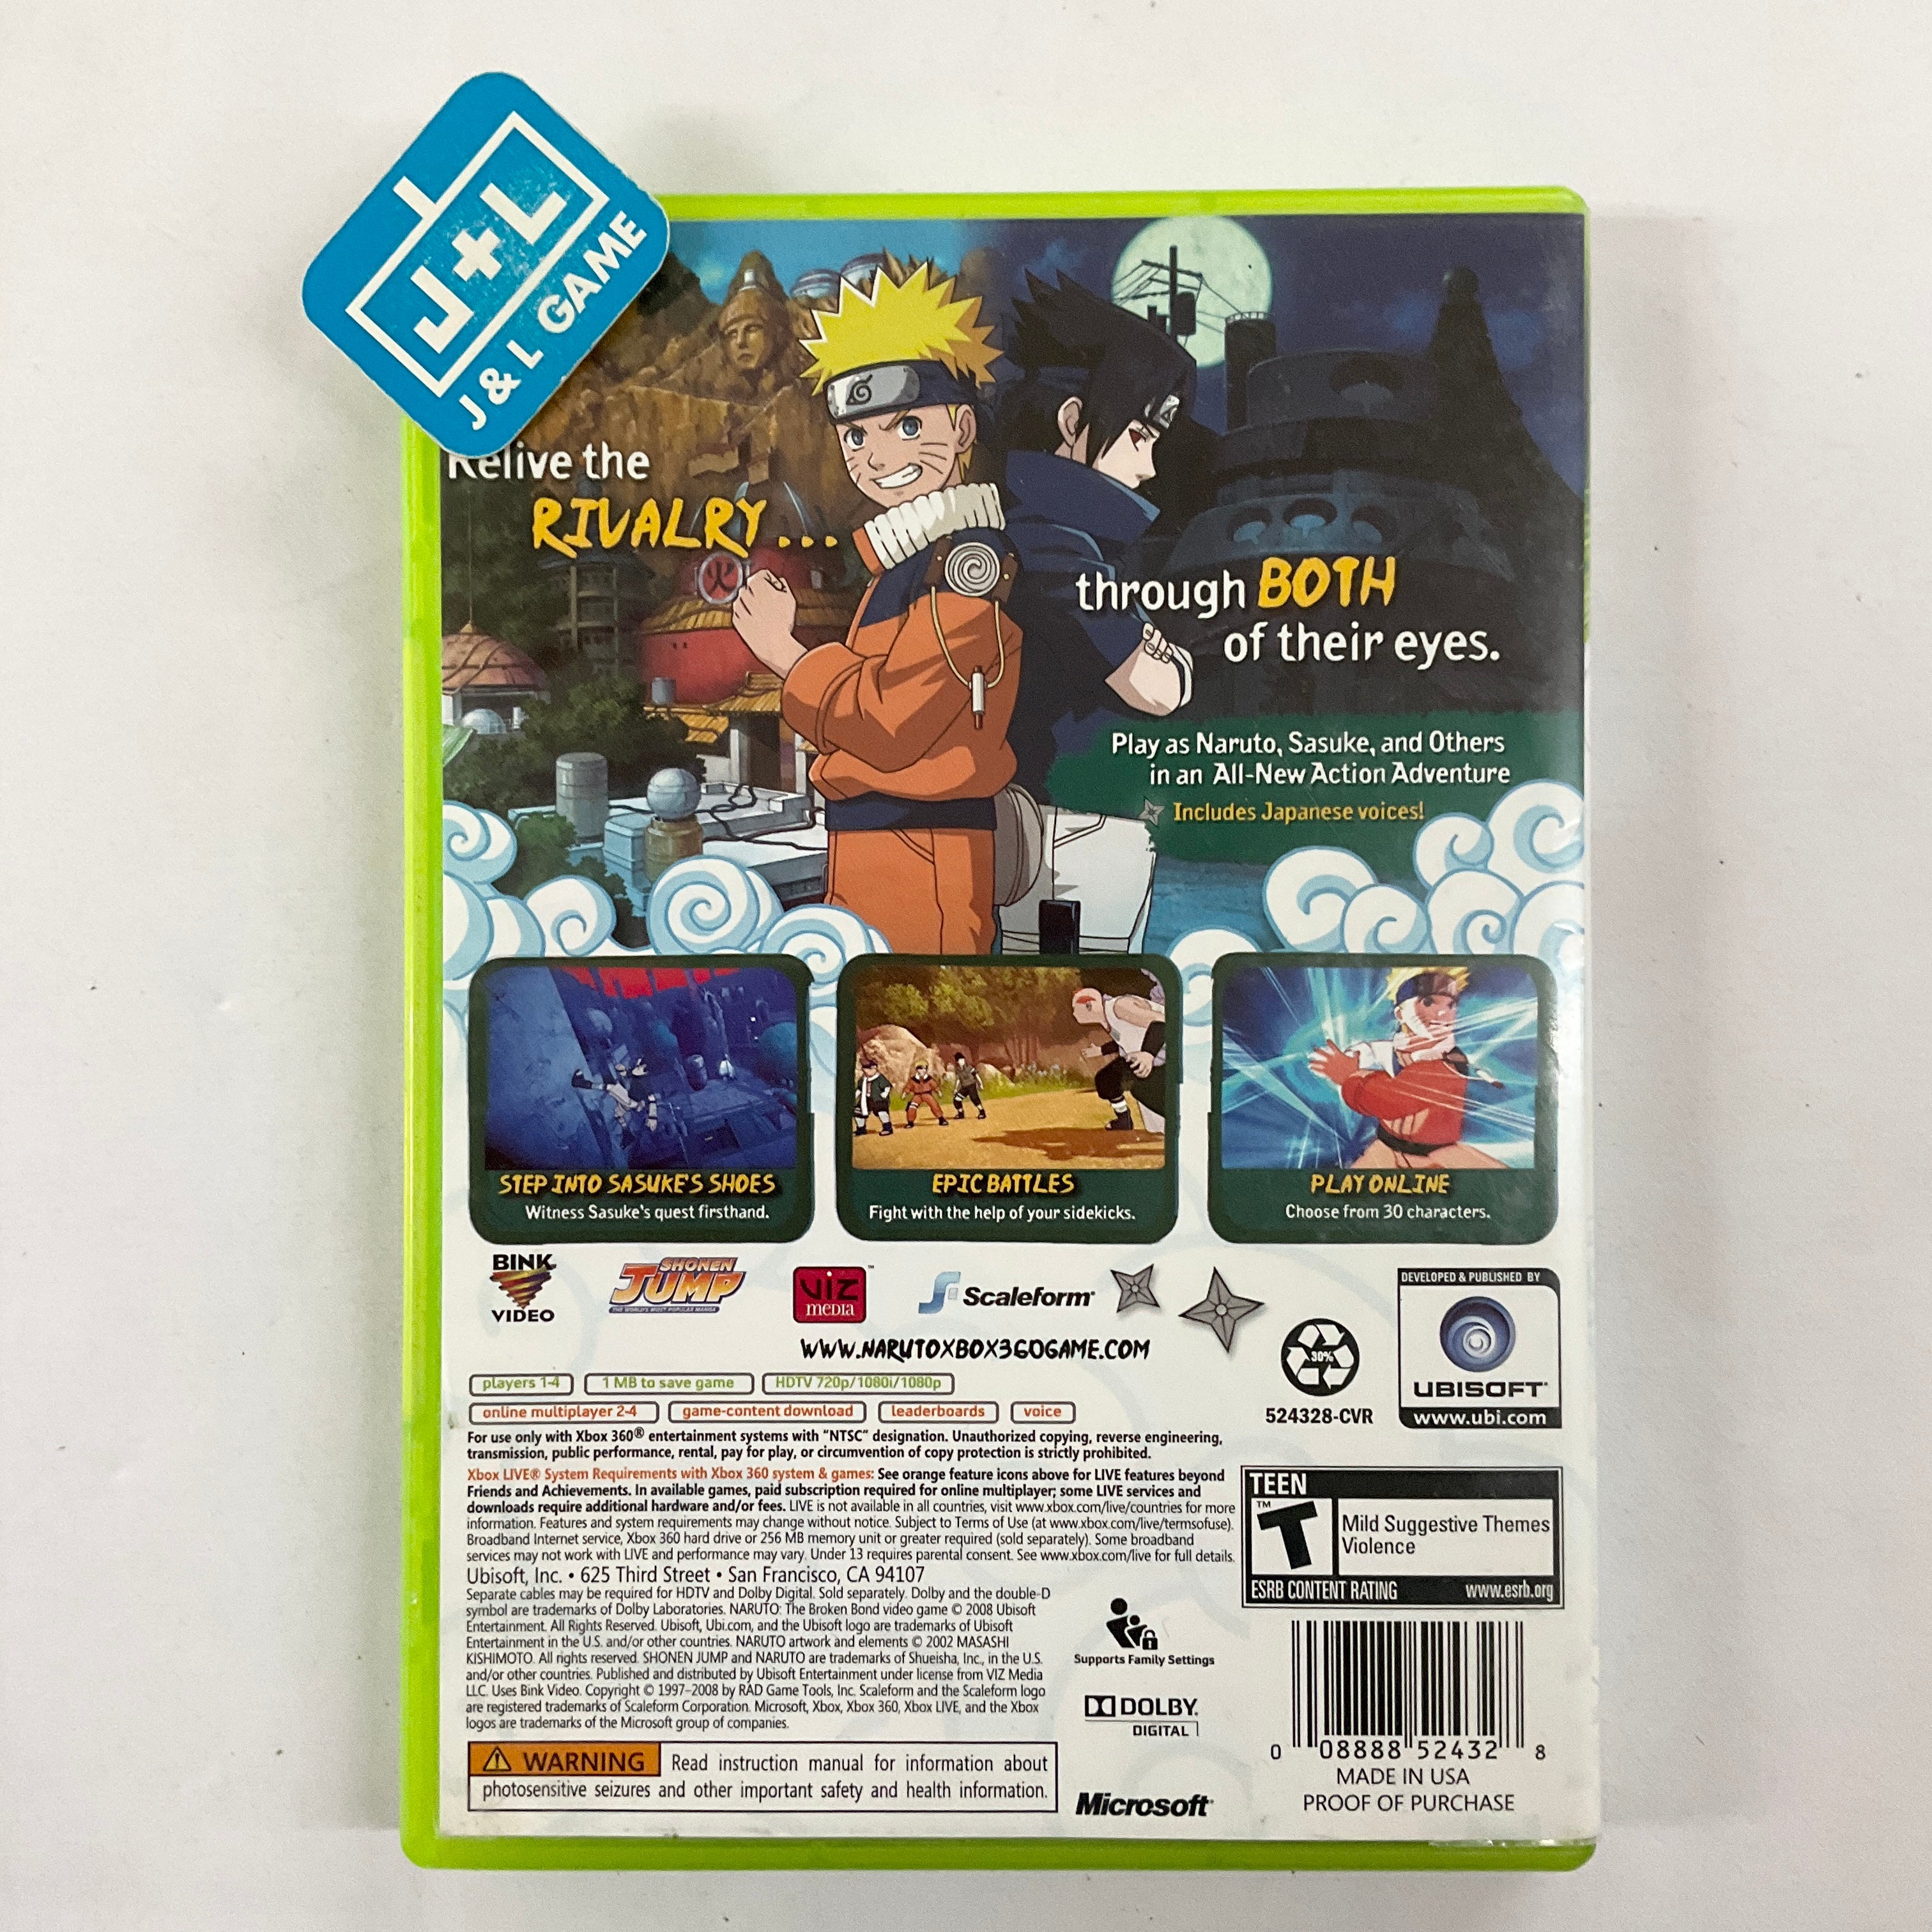 Naruto: The Broken Bond - Xbox 360 [Pre-Owned] Video Games Ubisoft   